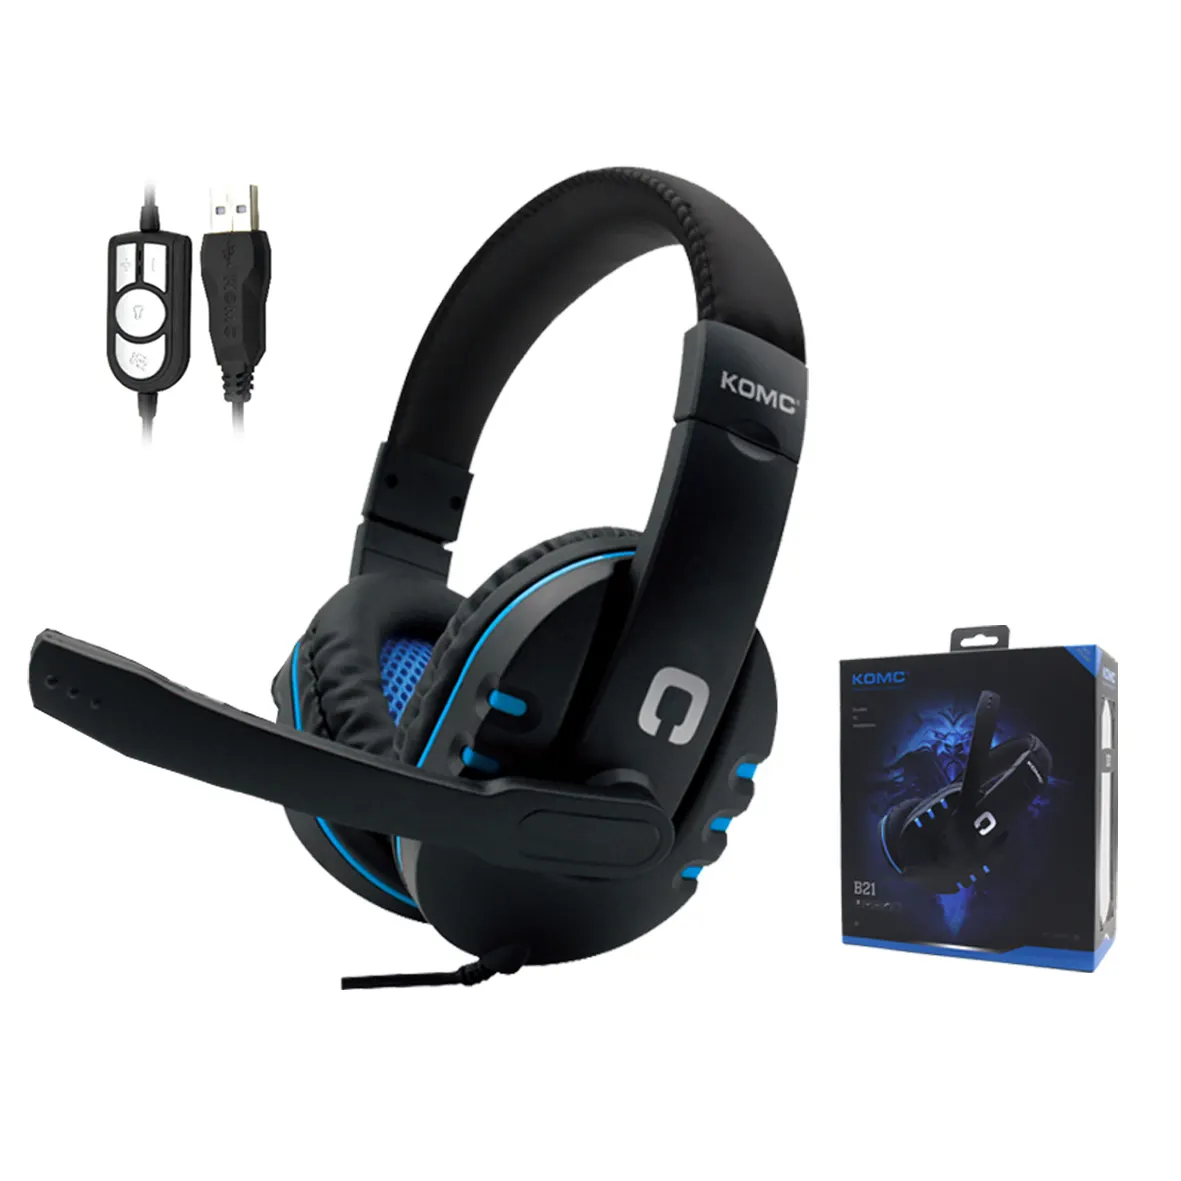 Shenzhen Top selling USB Gaming Headphones 7.1 Surround Sound Computer Earphones Games Headset with Microphone for PC Gamer